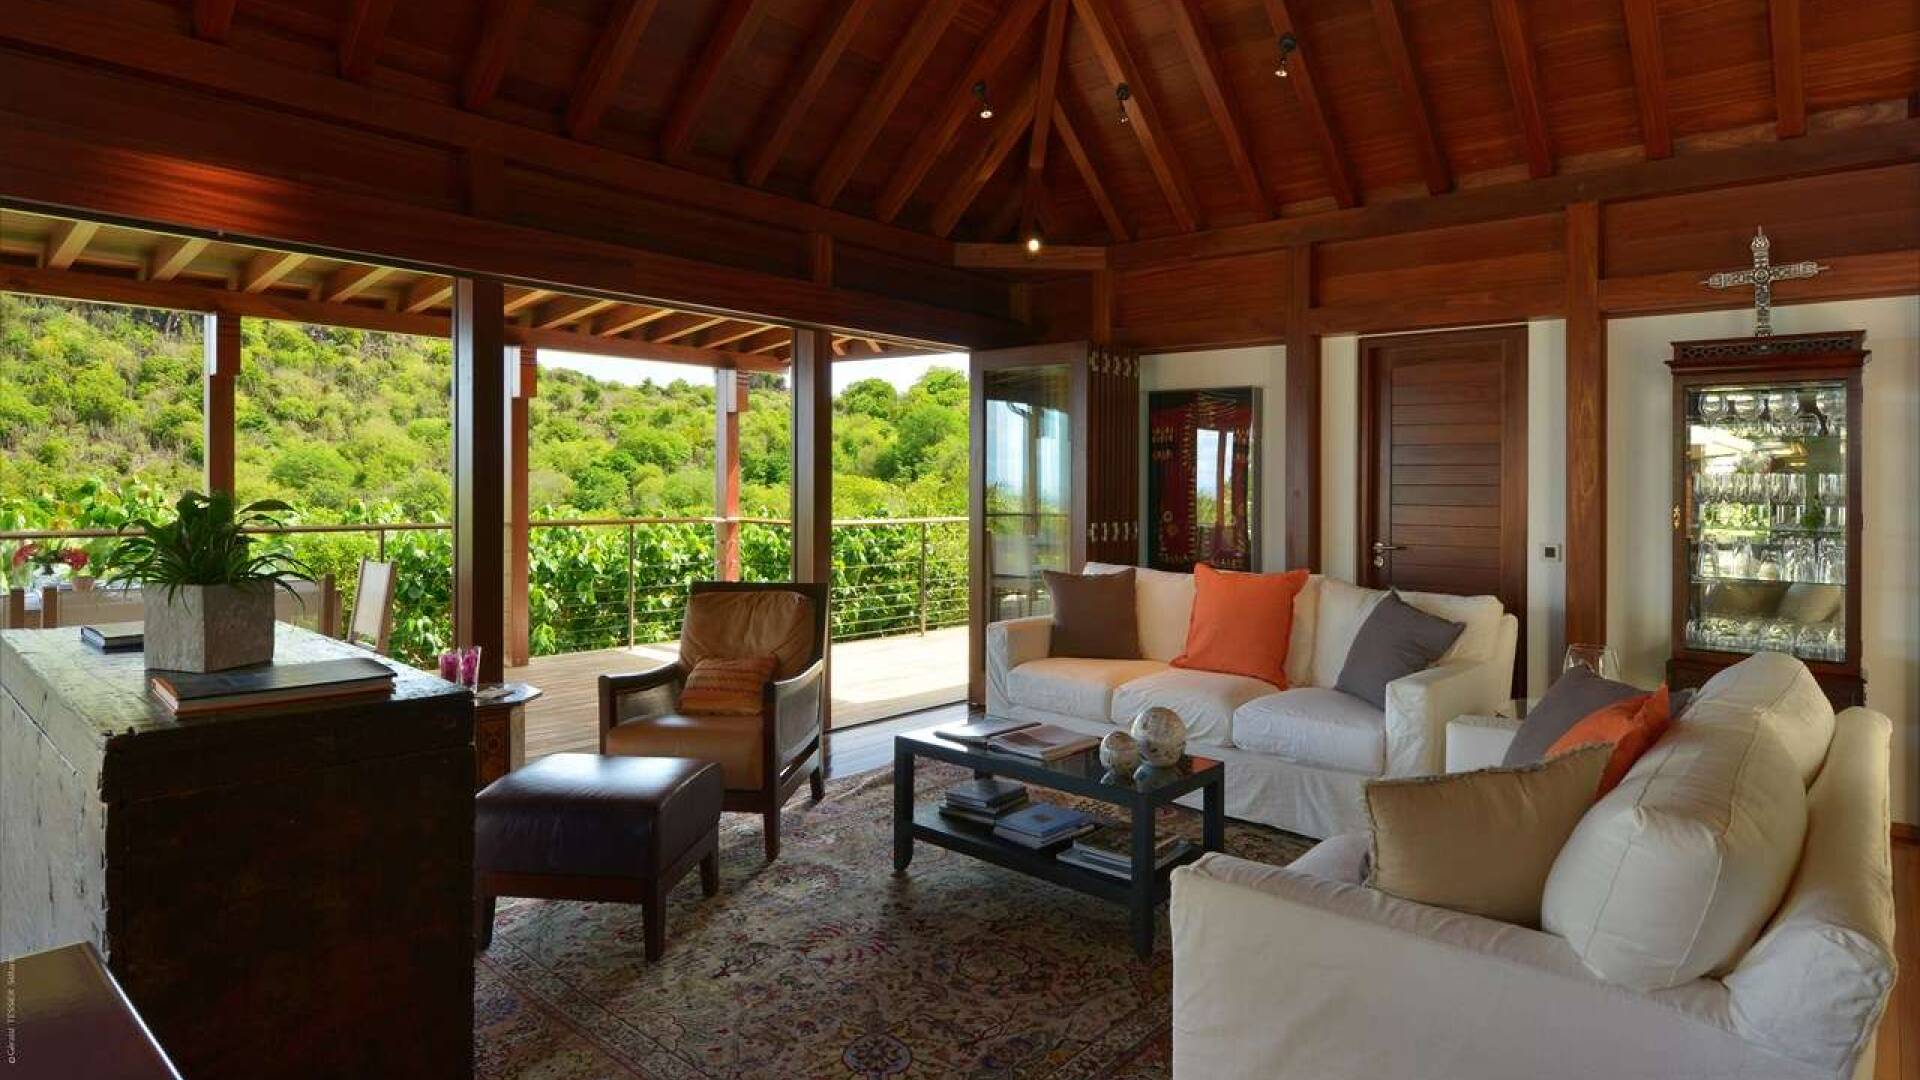 Living Room at WV MJP, Flamands, St. Barthelemy